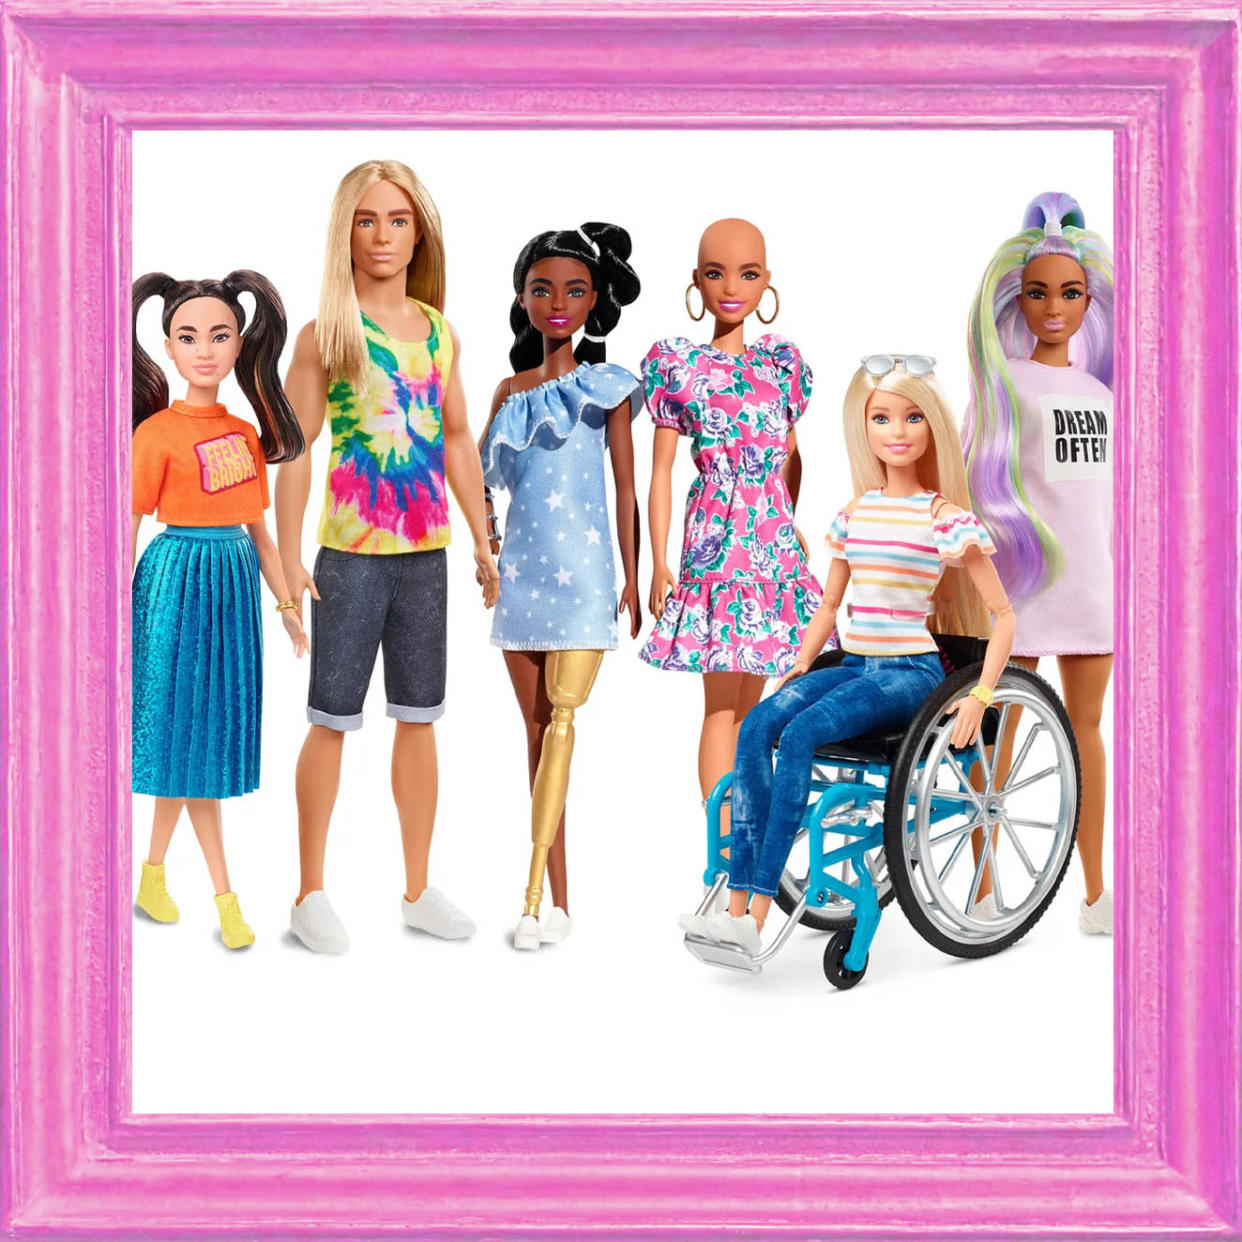 Mattel created multiple Barbie dolls representing people with disabilities (Mattel)